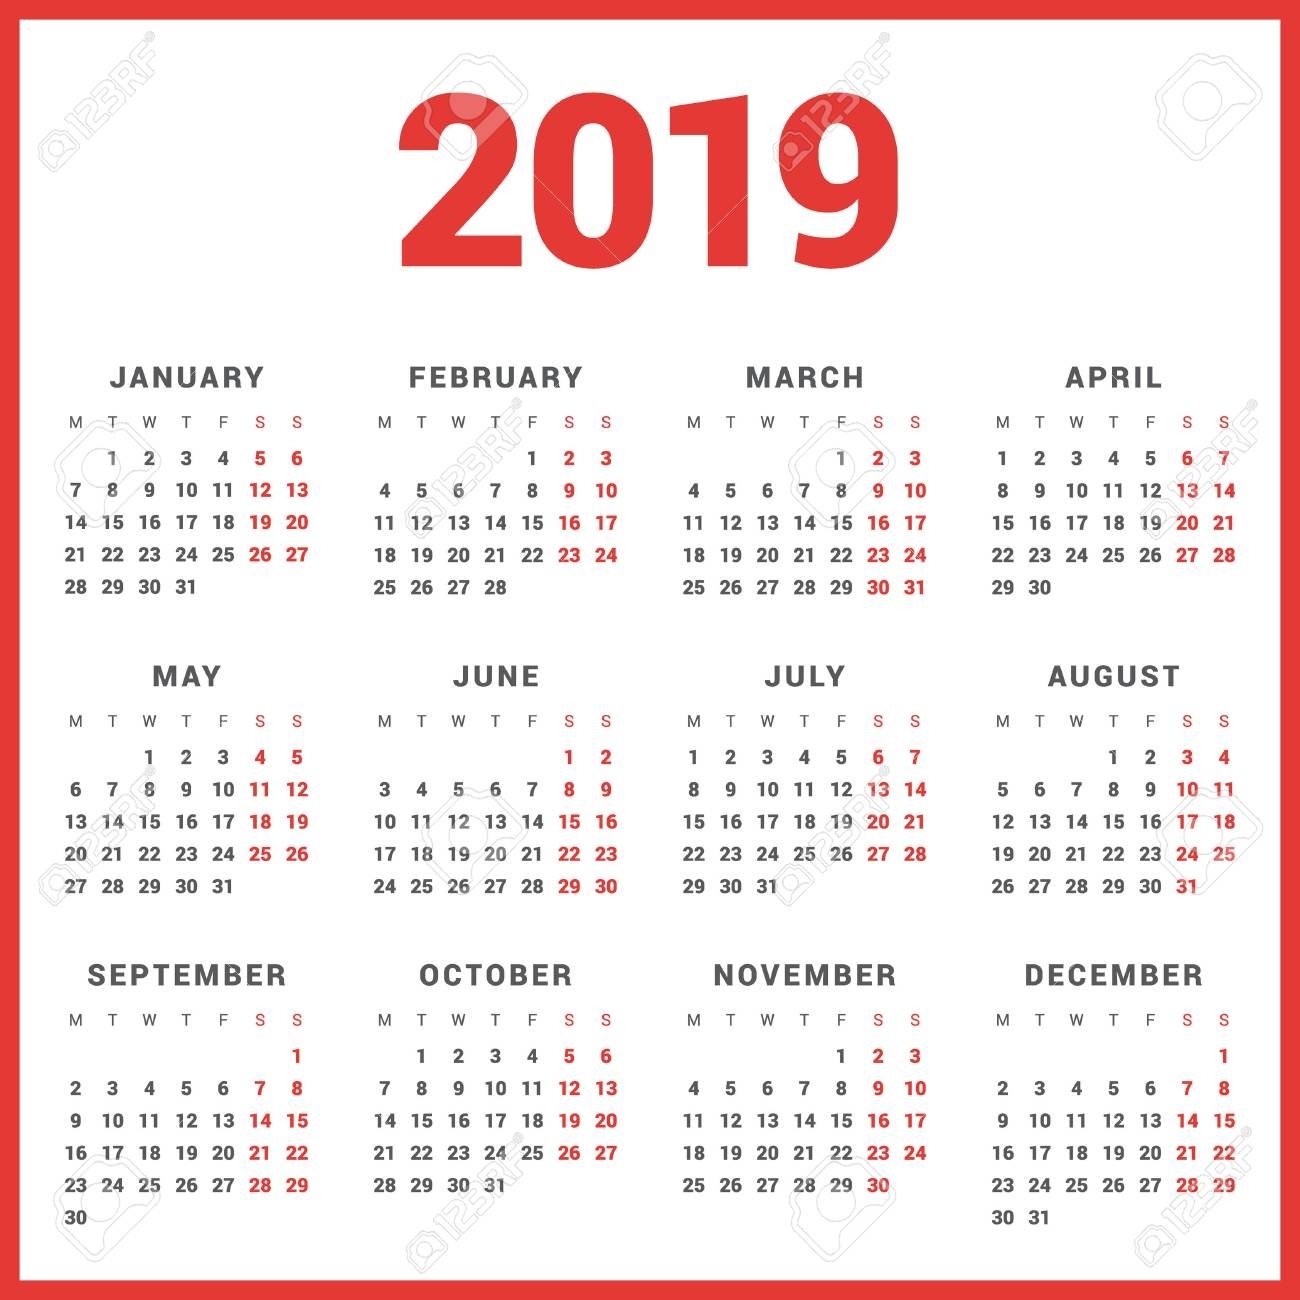 Calendar For 2019 Year On White Background. Week Starts Monday